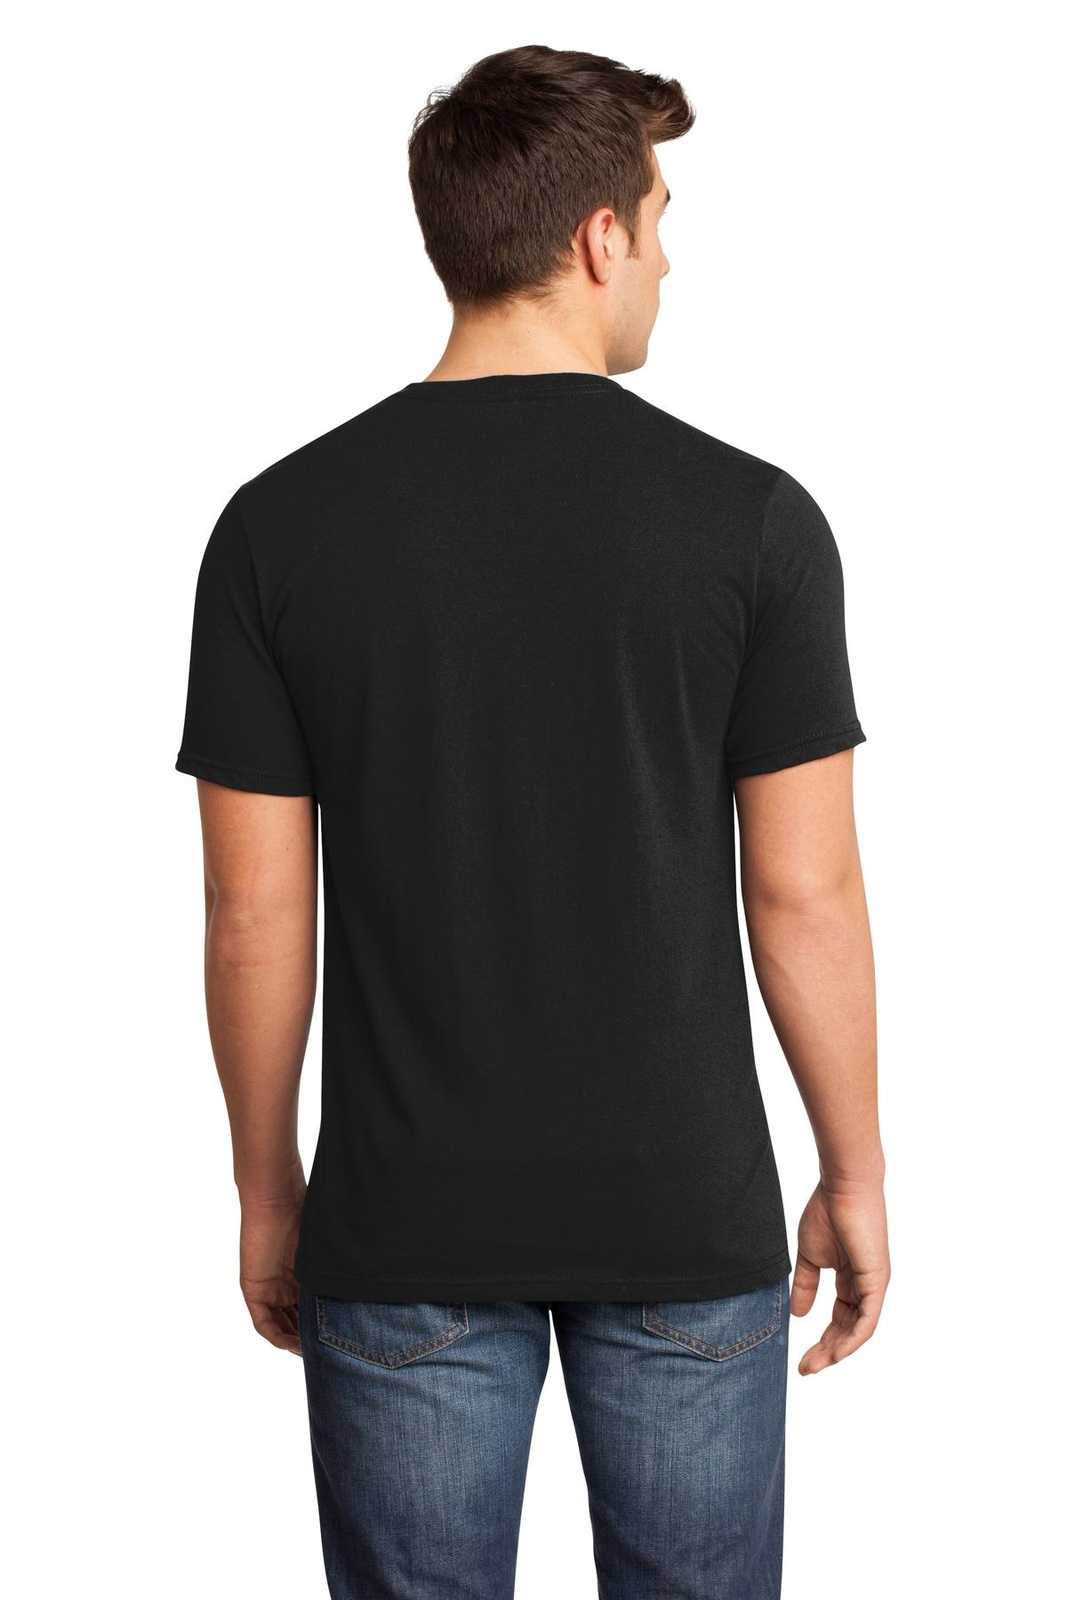 District DT6500 Very Important Tee V-Neck - Black - HIT a Double - 2